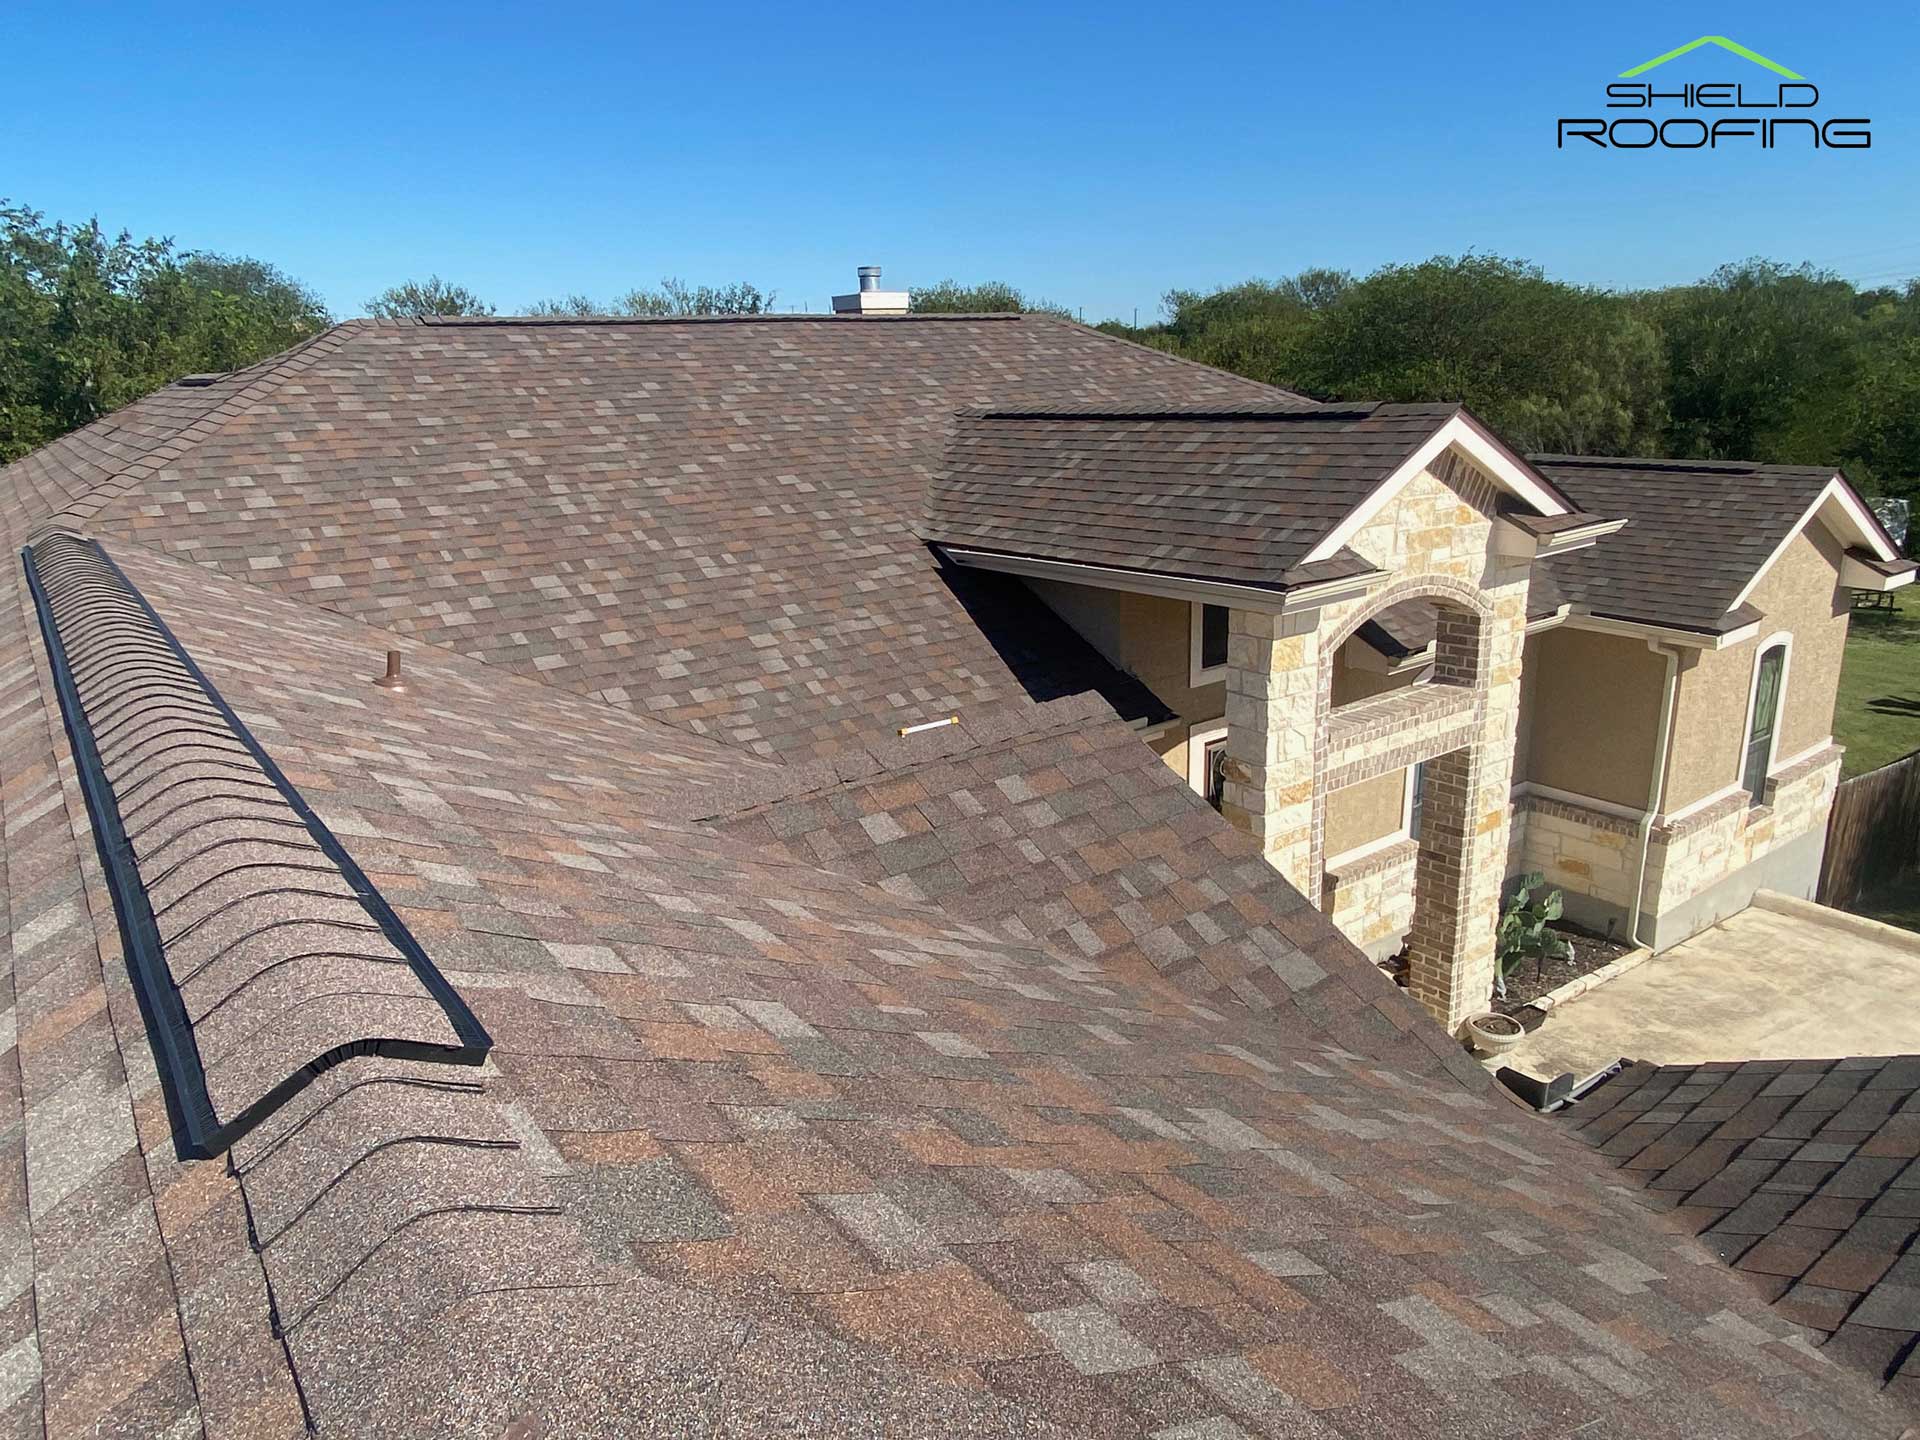 The Importance of Hiring Professional Roofing Contractors in San Antonio for Roof Repairs and Residential Roofing